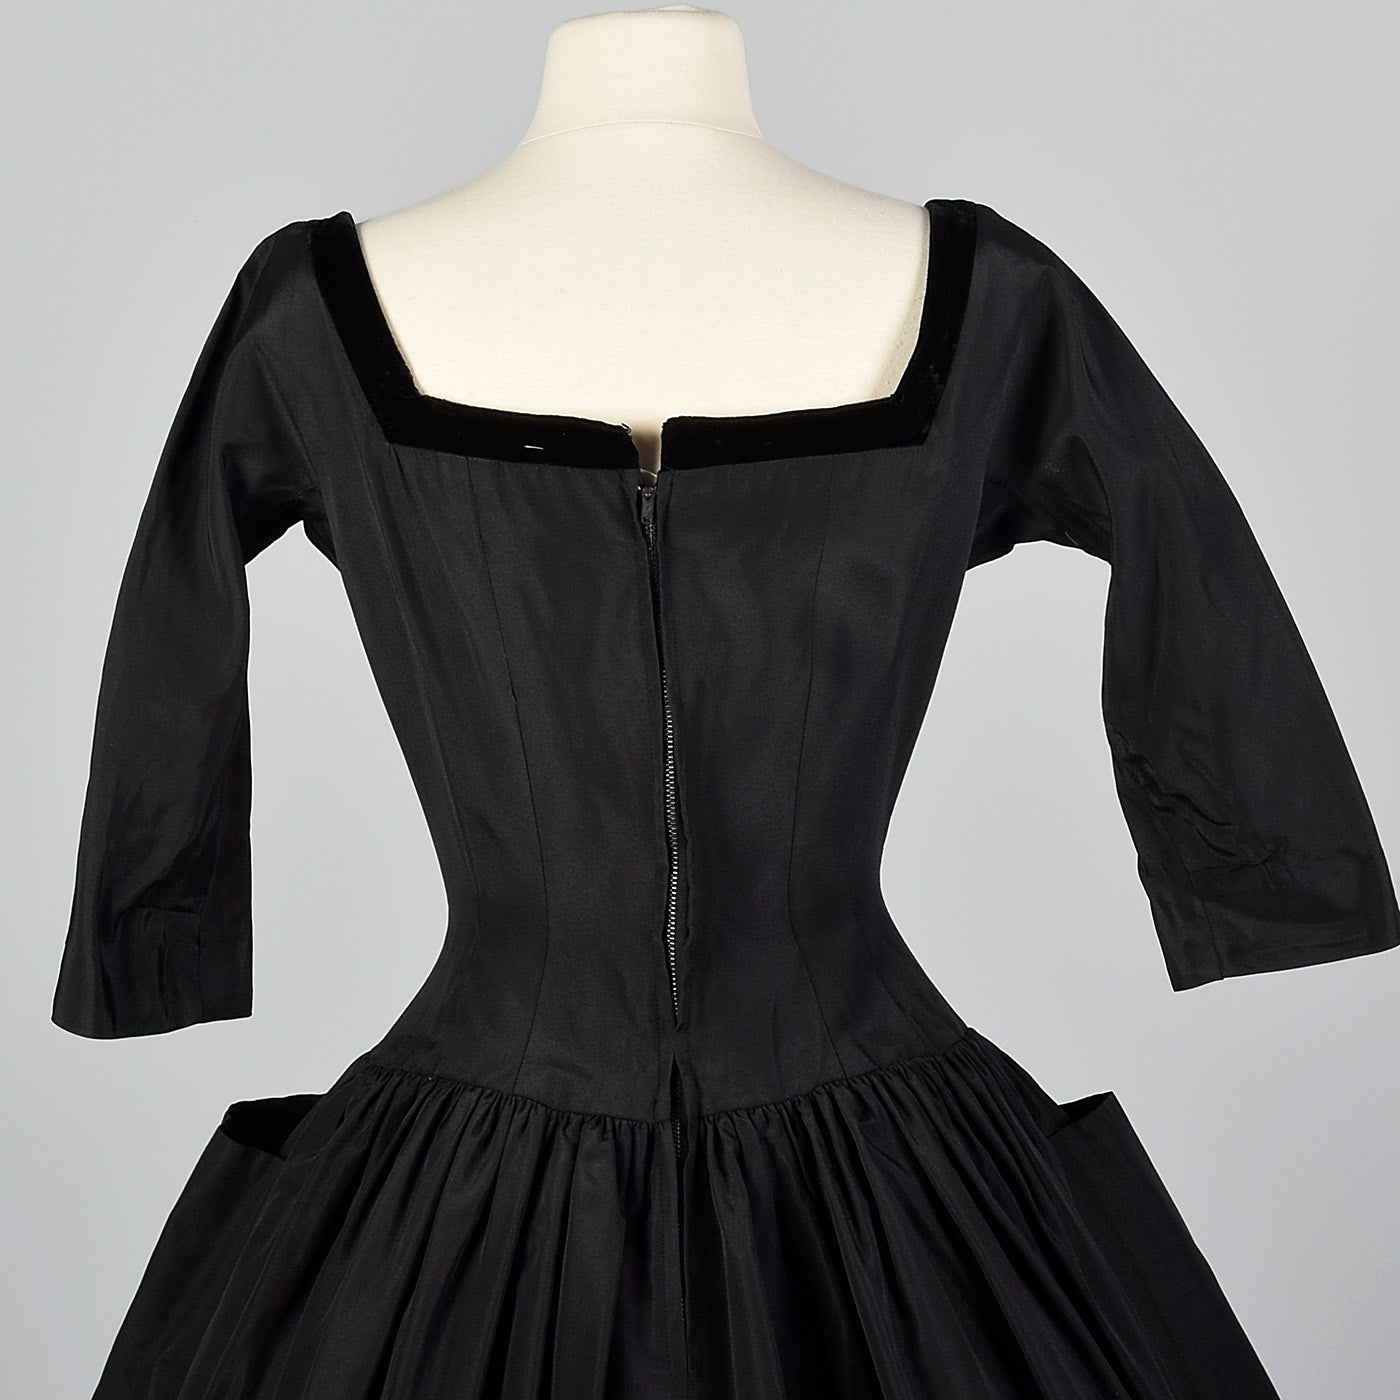 1950s Black Dress with Full Circle Skirt and Patch Pockets